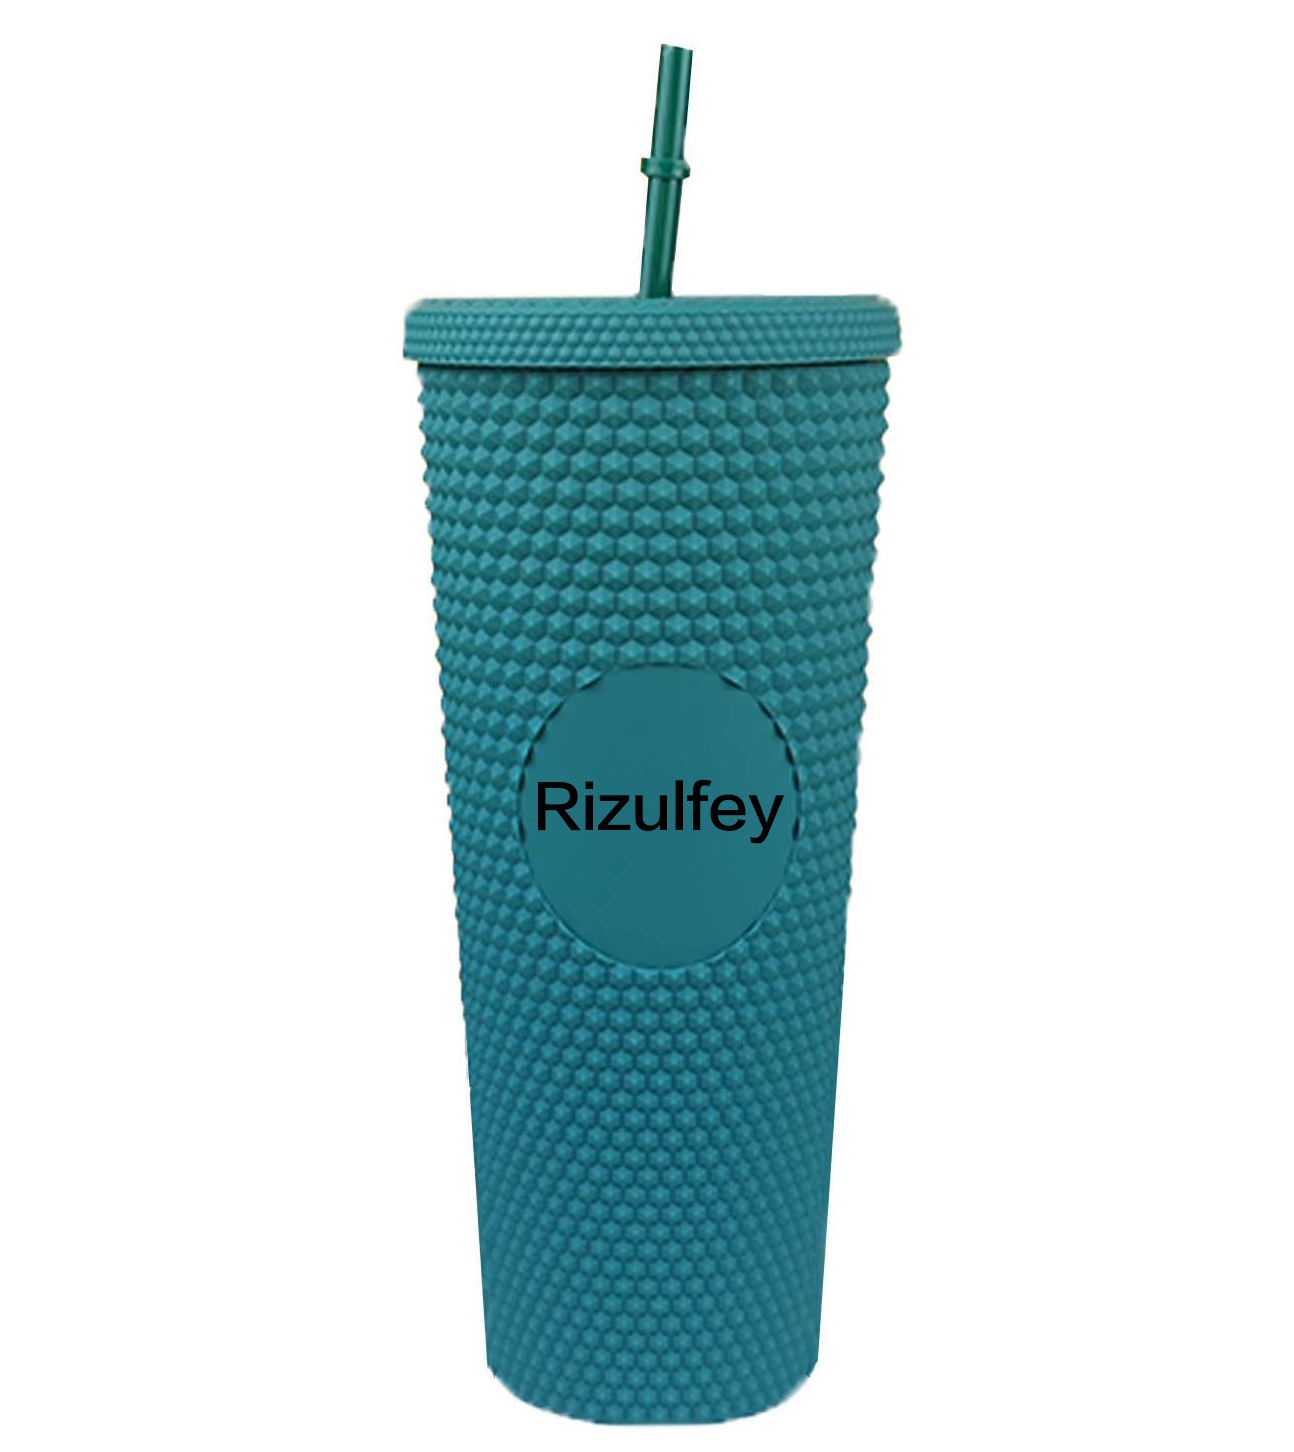 Reusable Iced Coffee Cup (24 Oz/Venti), Leak Proof and Double Wall  Insulated Iced Coffee Tumbler, Come with Reusable Plastic and Metal Straws  and